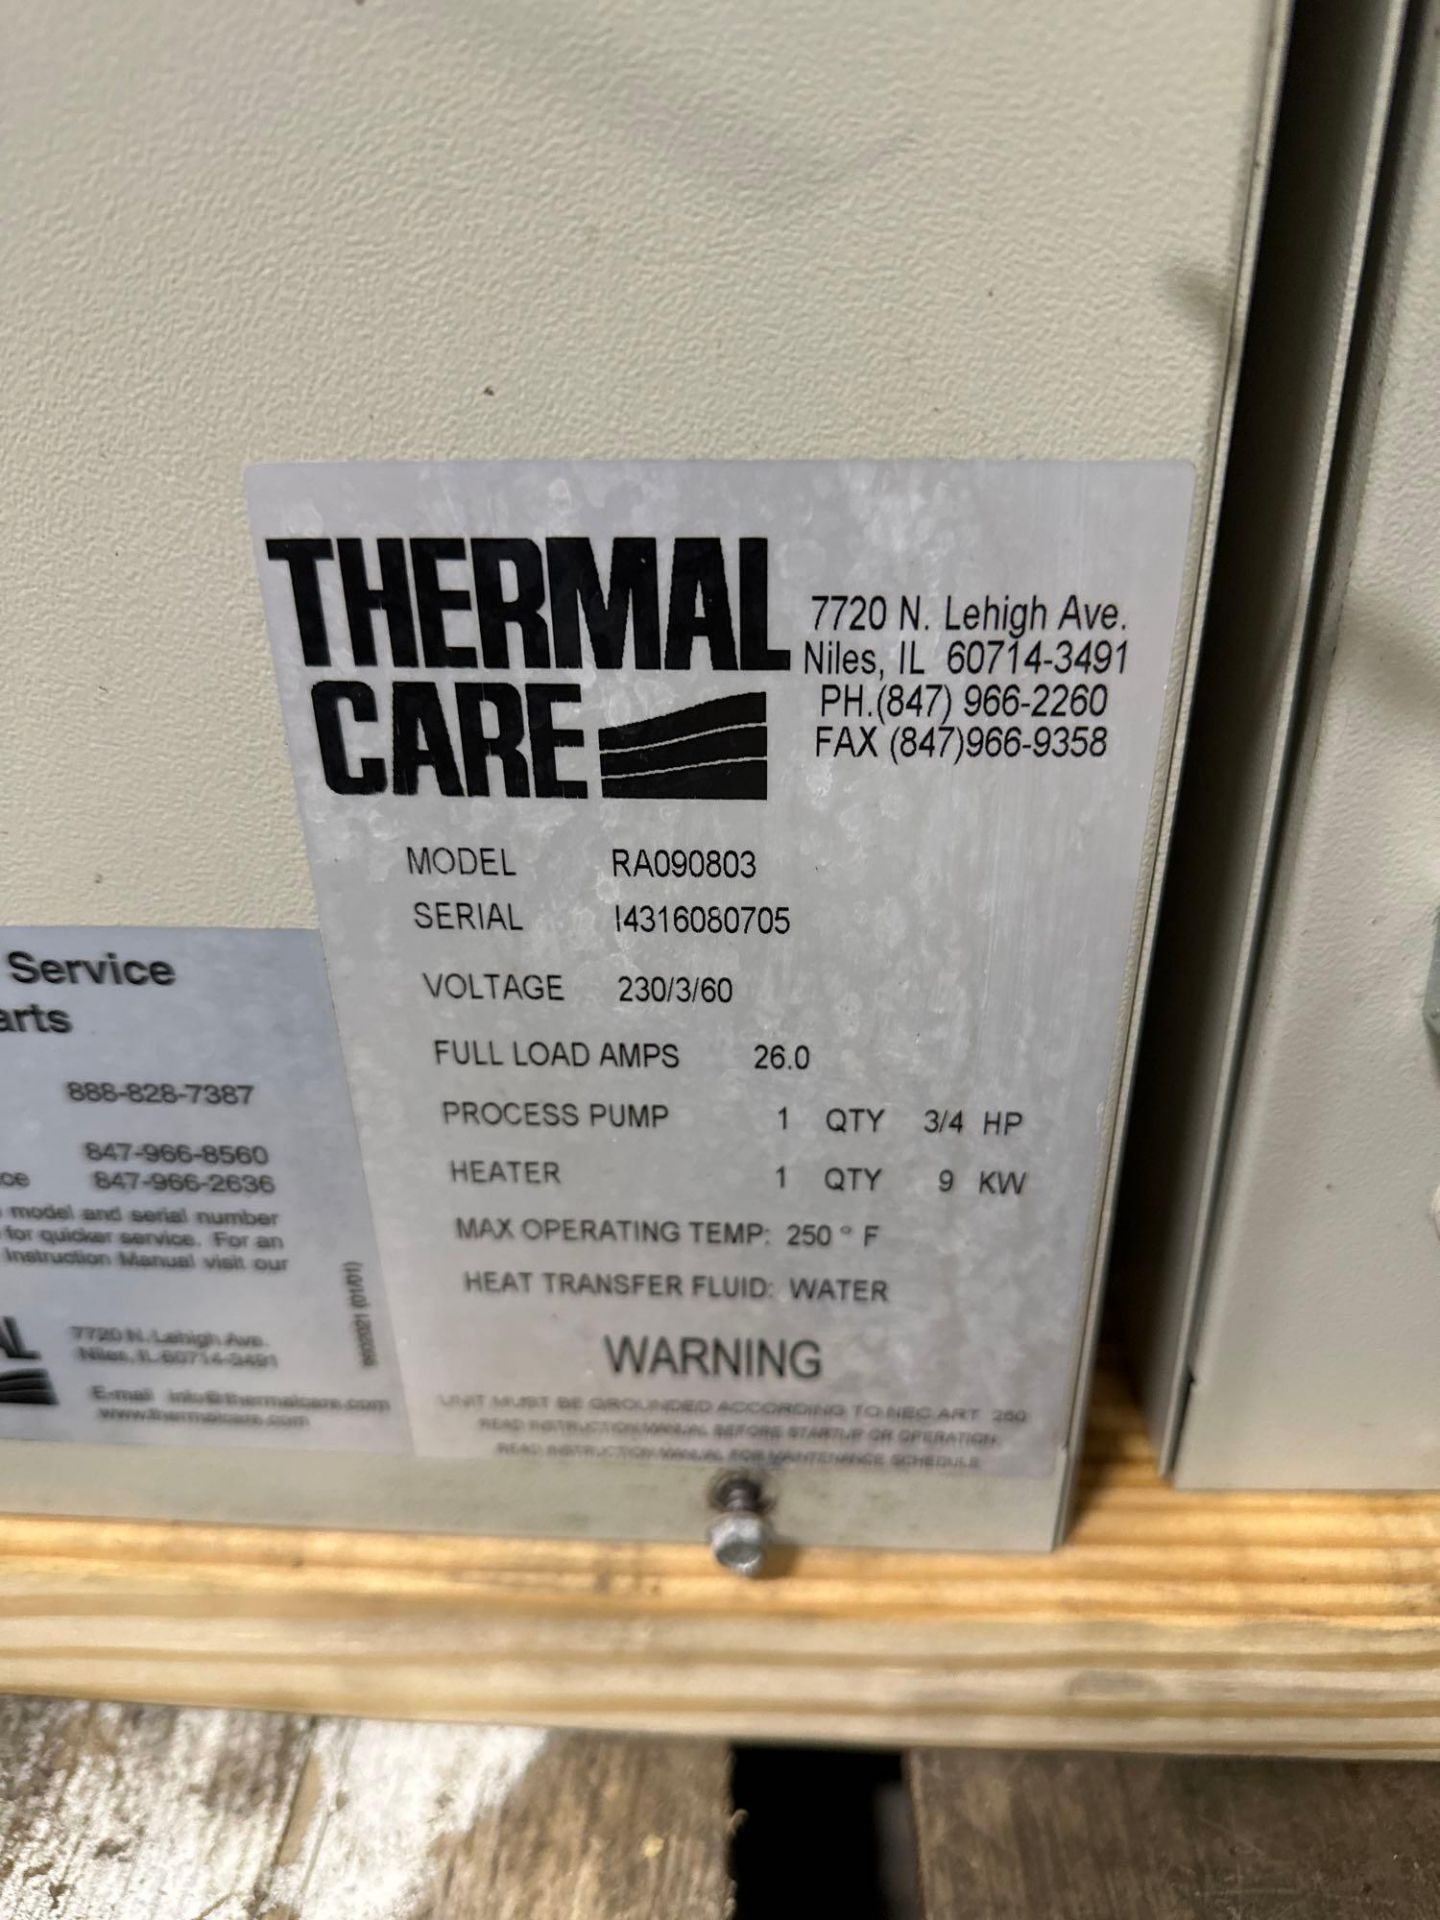 Aqua Therm Thermal Care RA090803 Thermolator, 30gpm, 19psi, s/n I4316080705 - Image 4 of 4